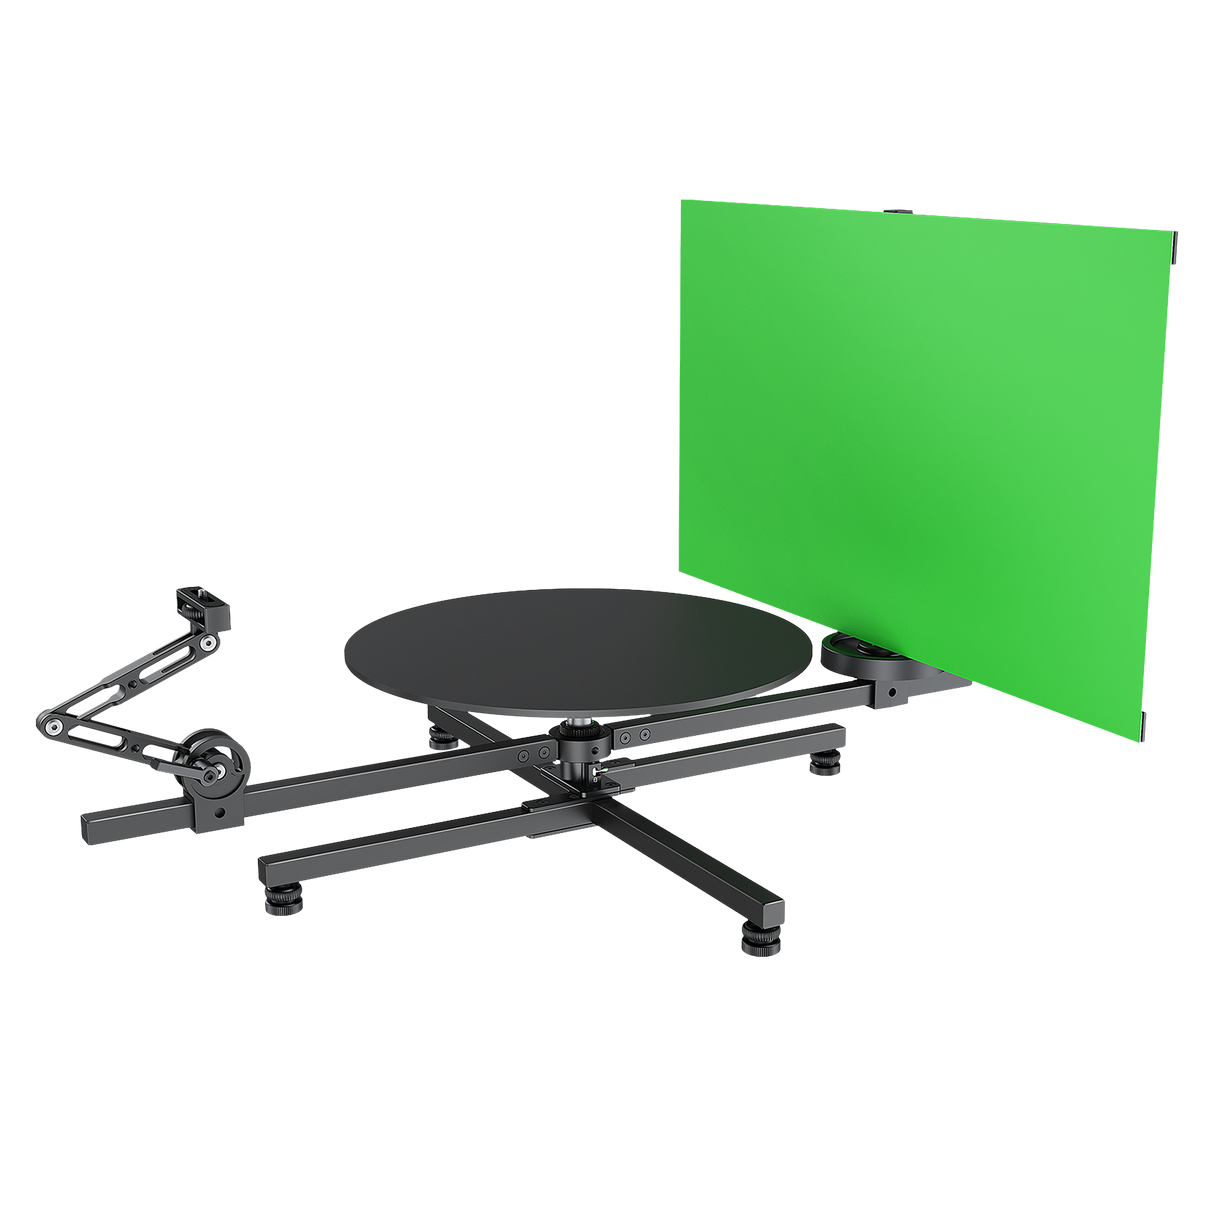 360 turntable rig